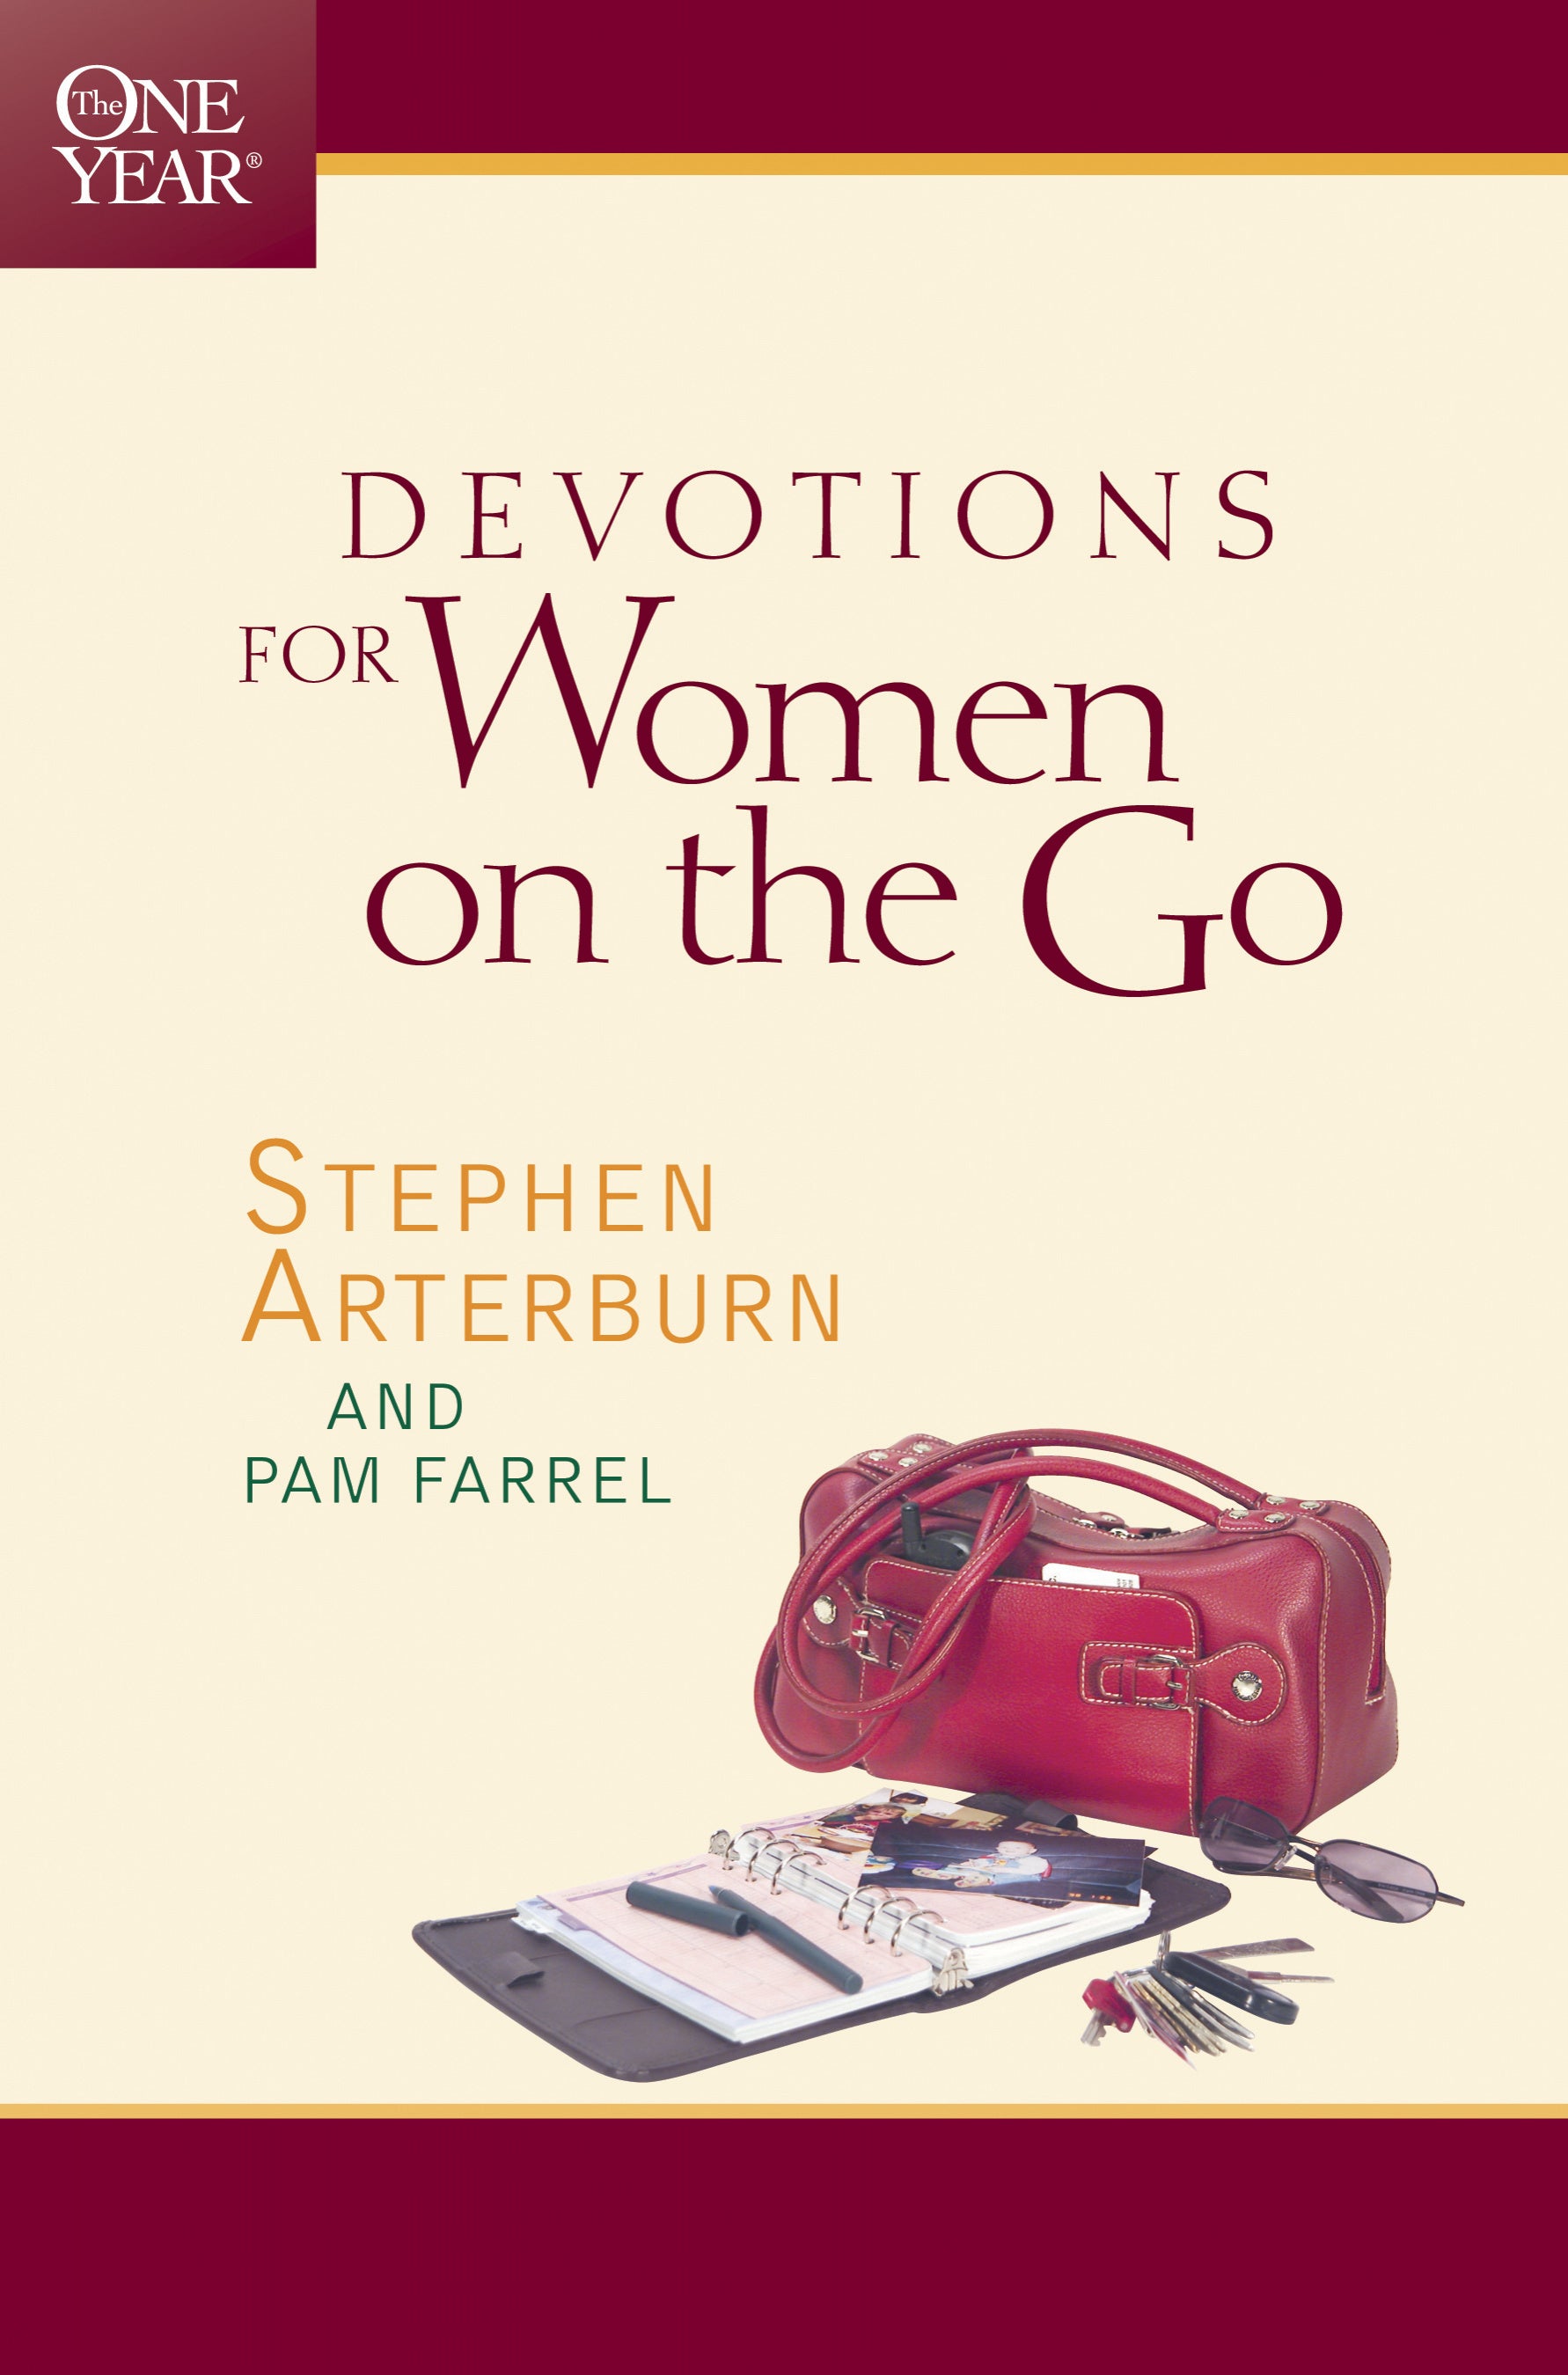 Image of The One Year Book of Devotions for Women on the Go other